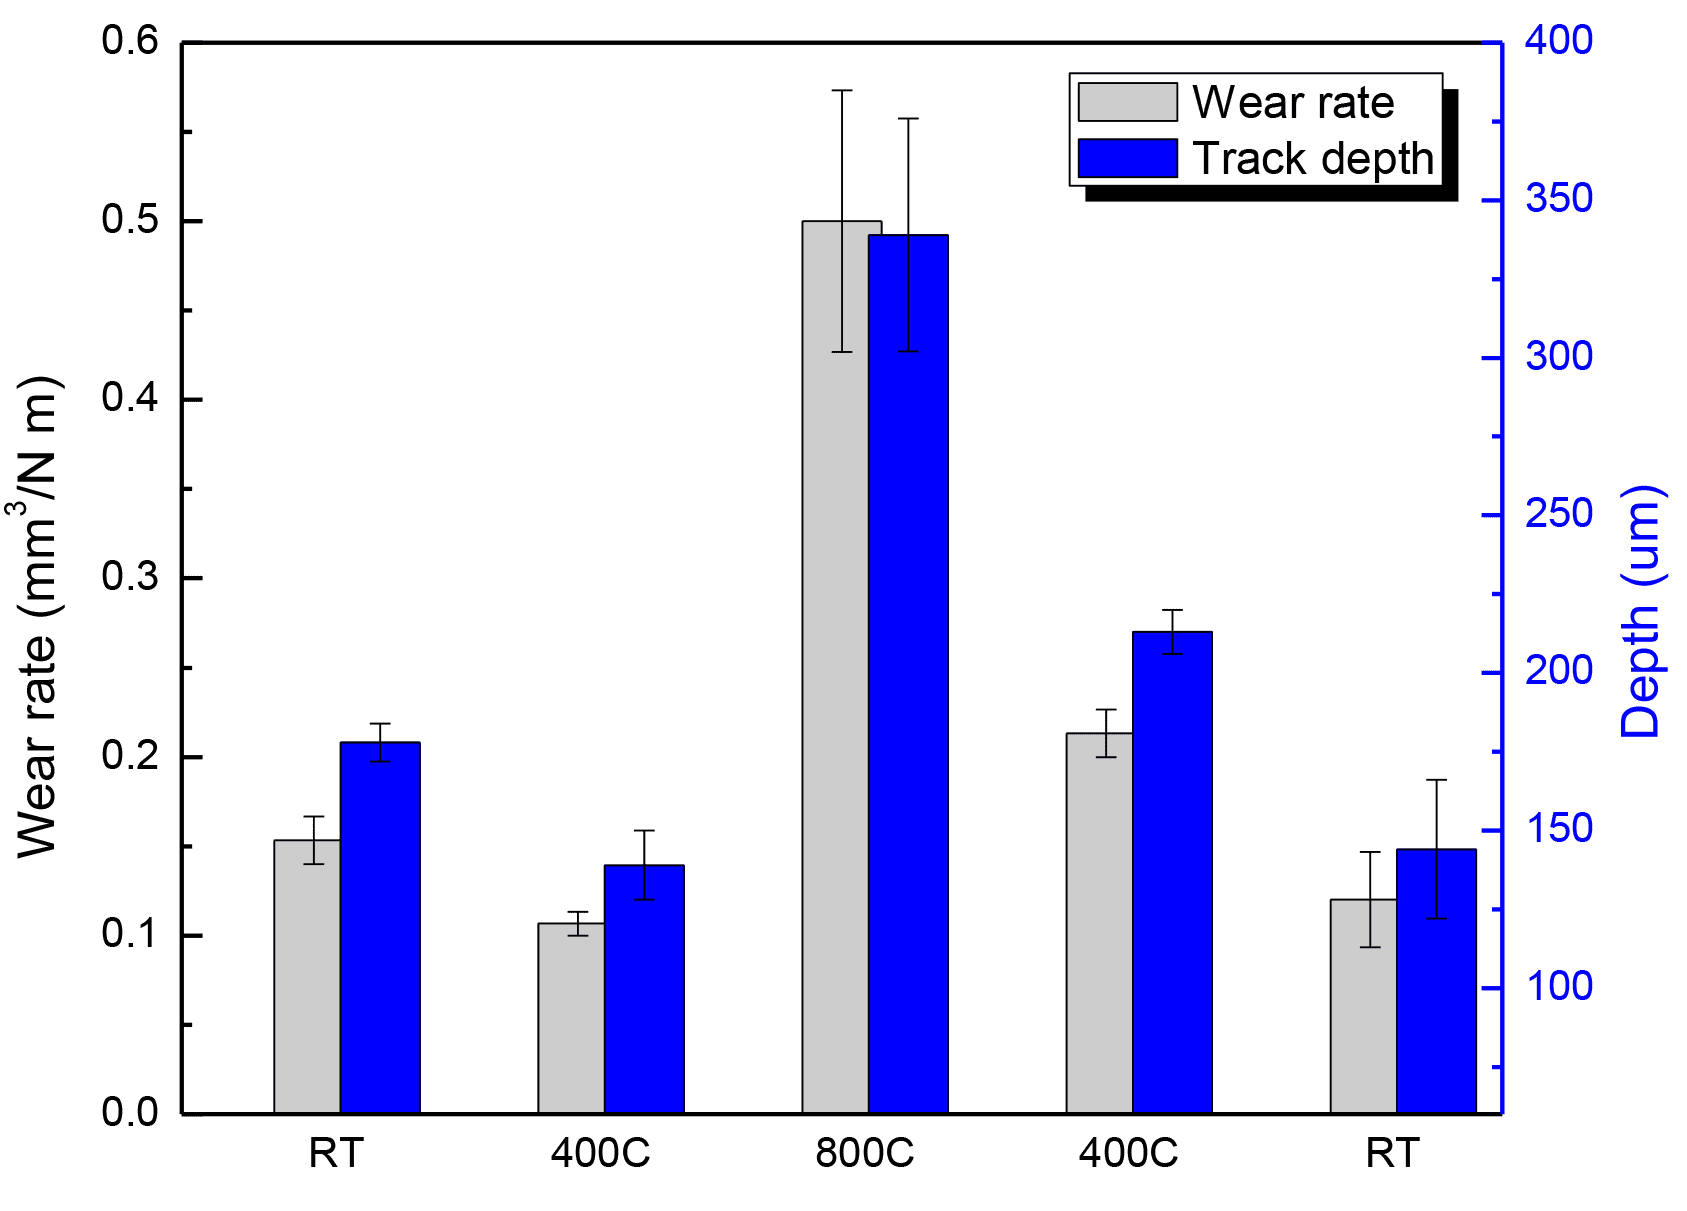 Wear rate and wear track depth of the sample at different temperatures 1